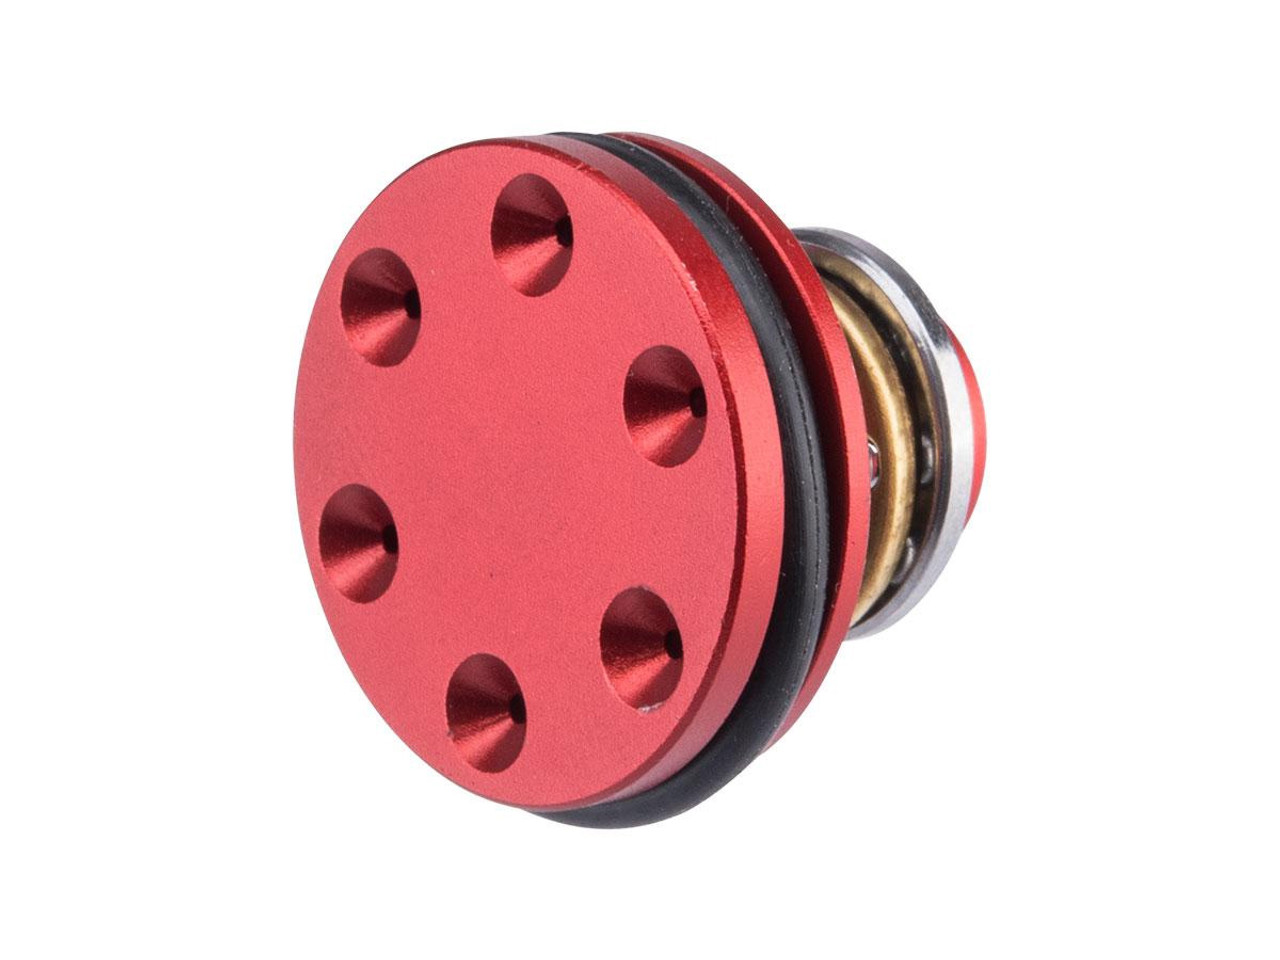 Rocket Airsoft Aluminum Ball Bearing Piston Head for Airsoft AEG Gearboxes